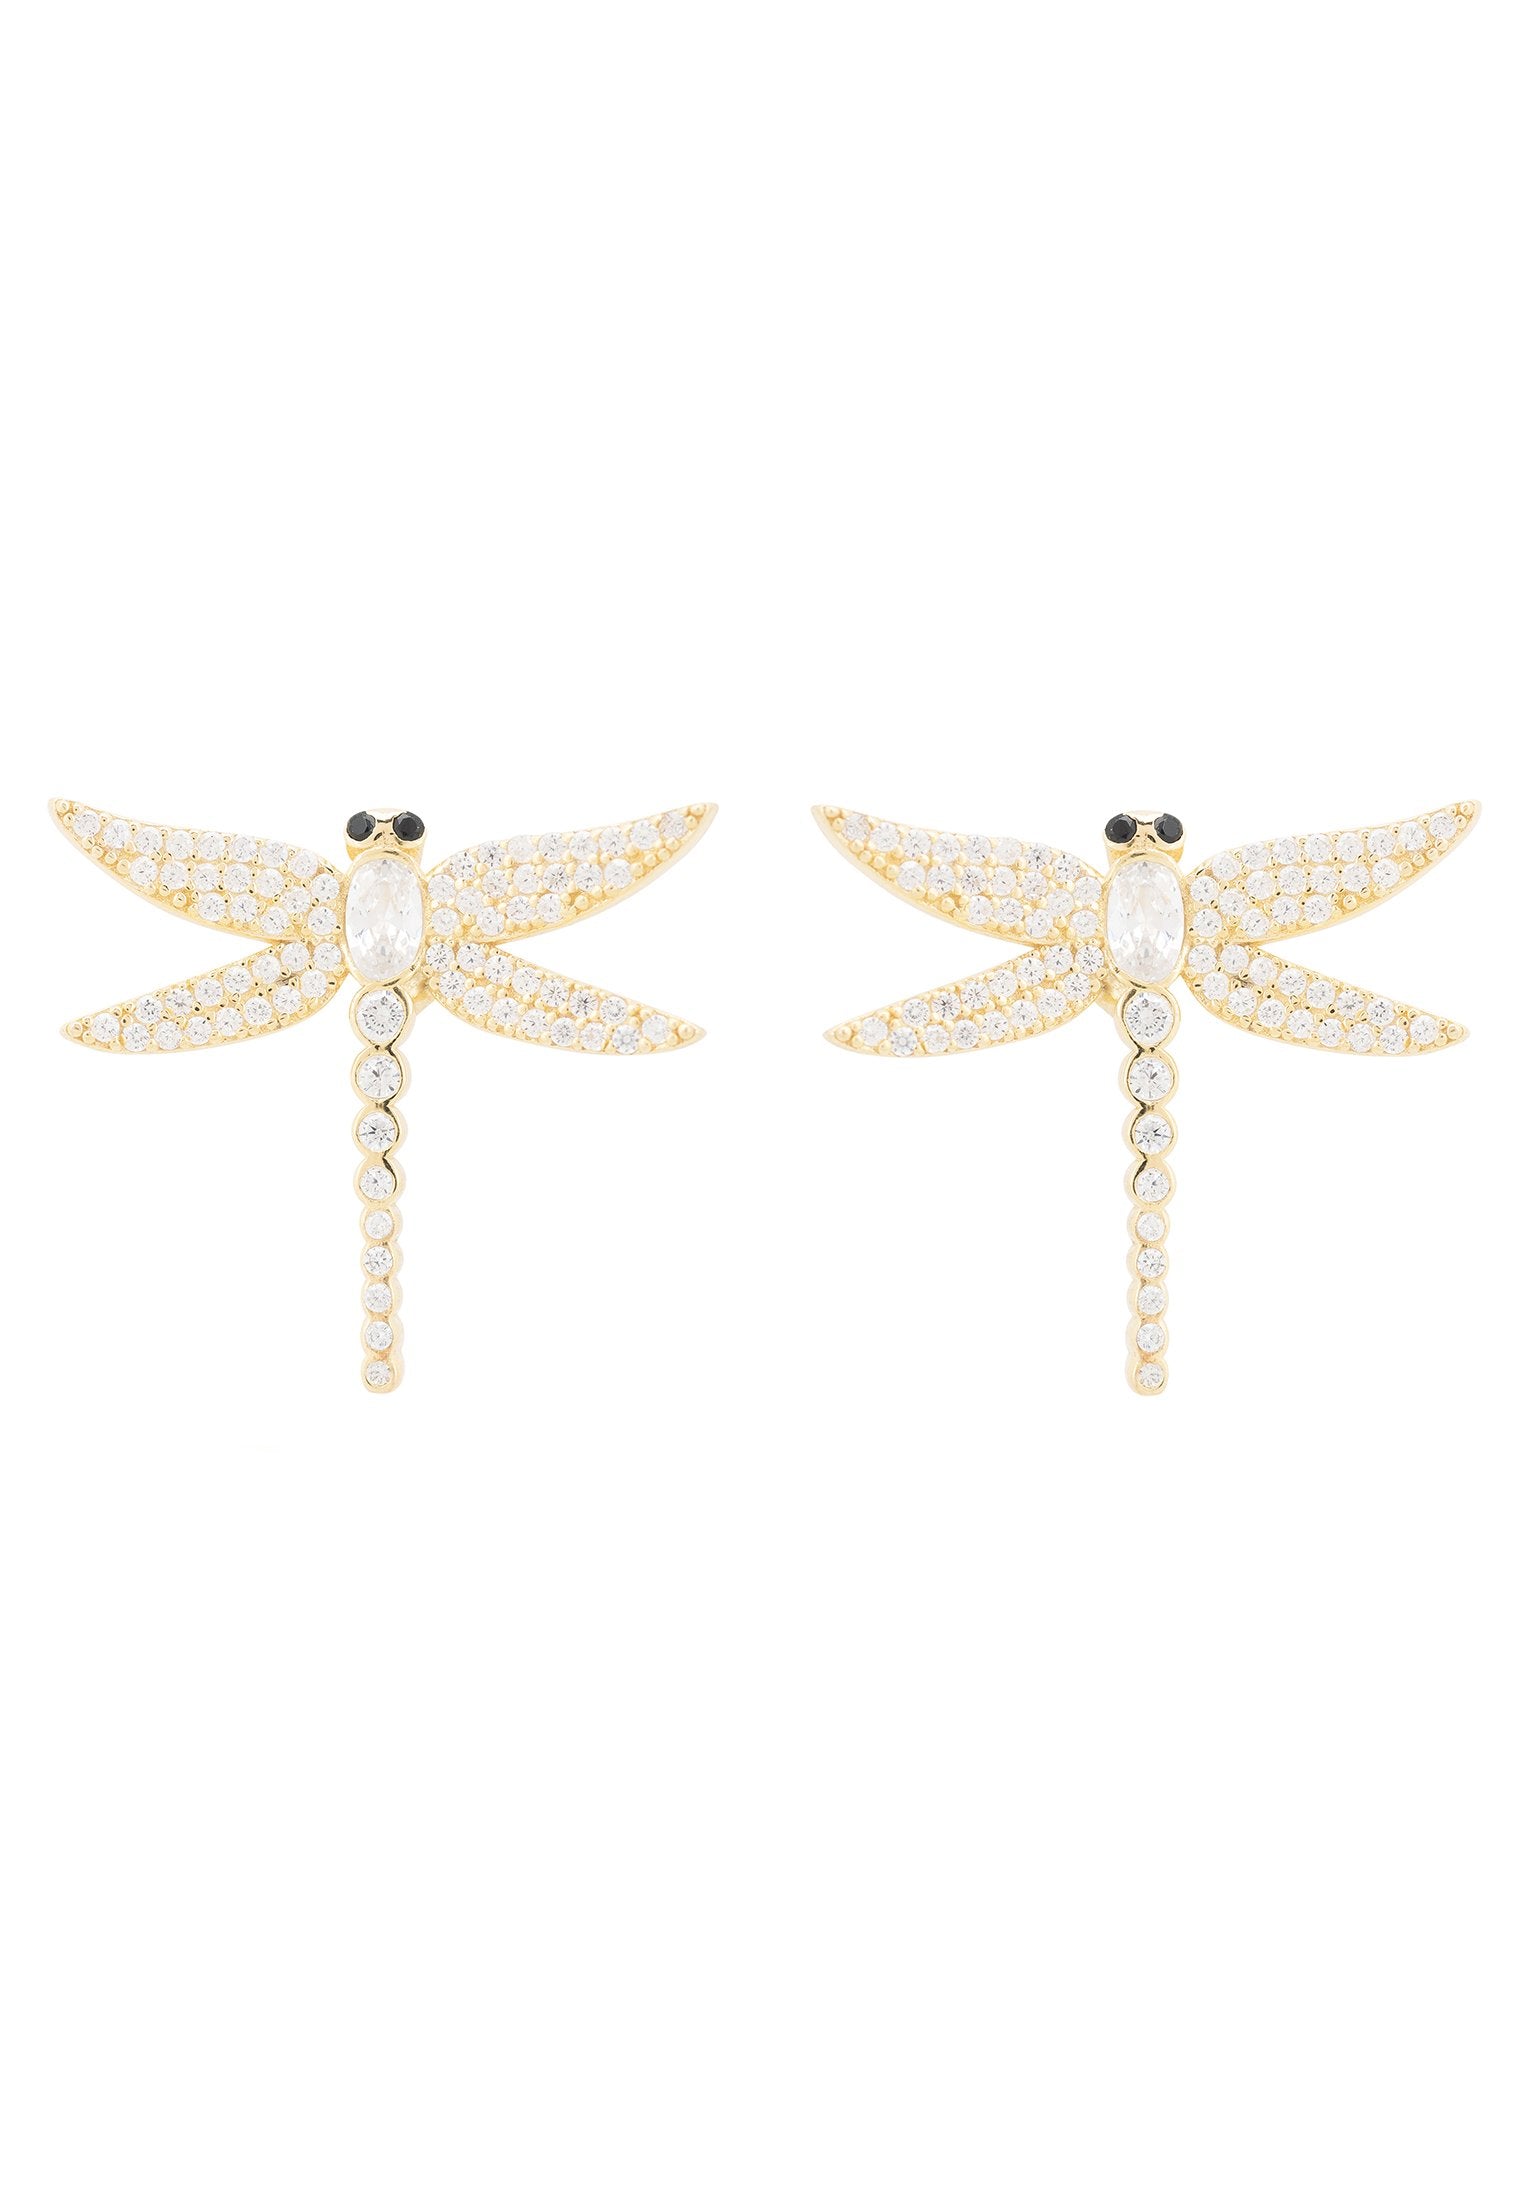 Dragon Fly Large Stud Earrings Gold